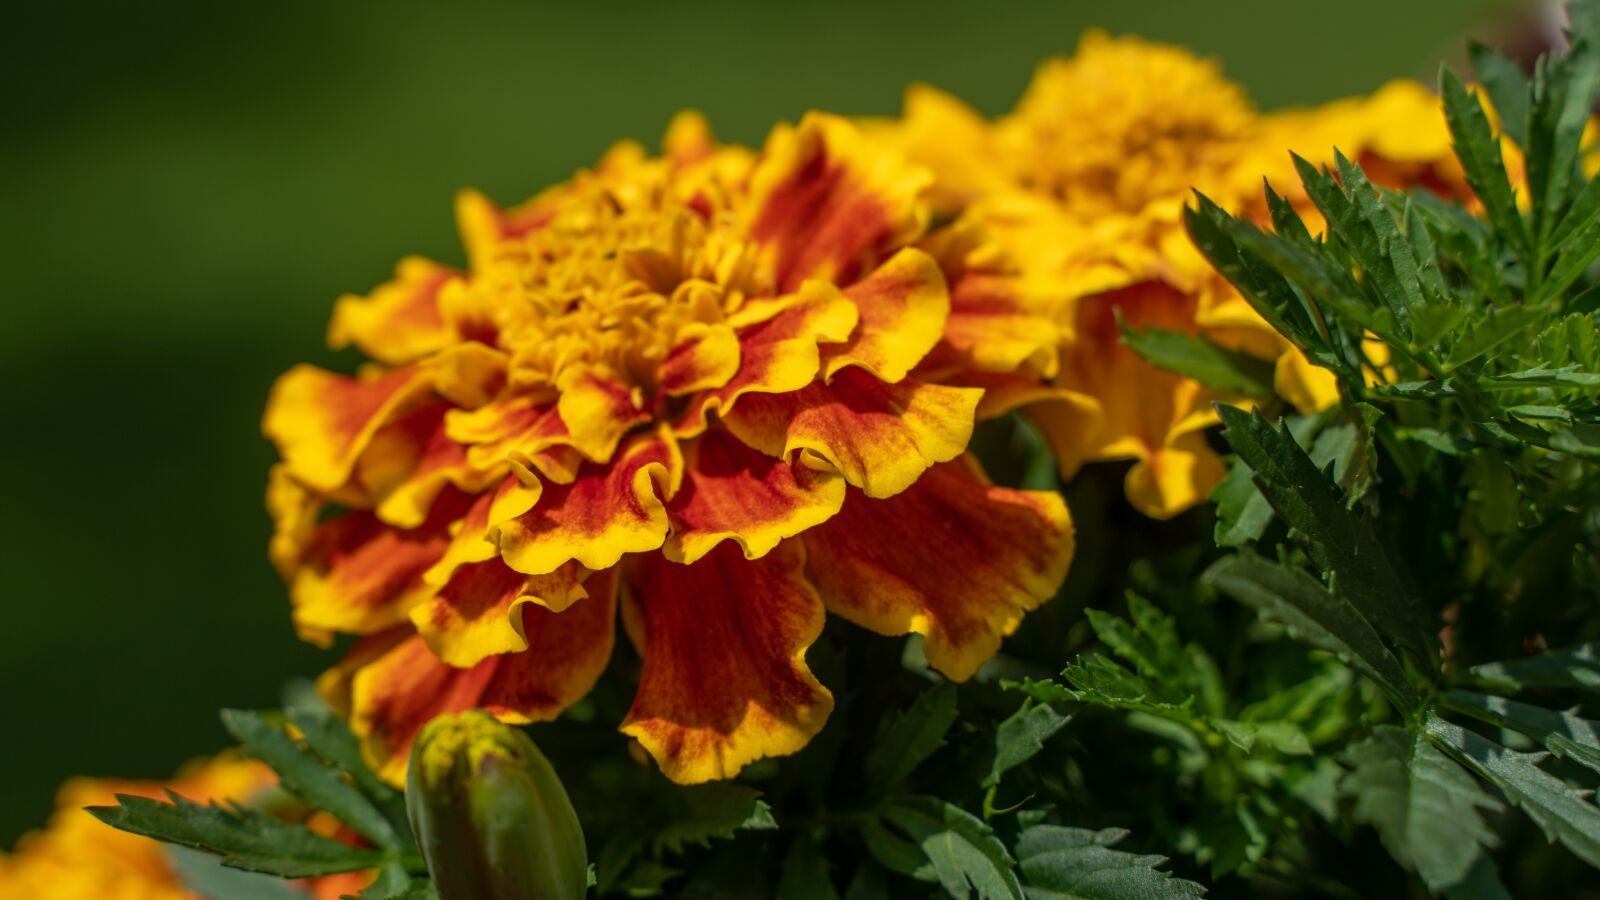 Sony a6300 sample photo. Marigold, plant, bloom photography